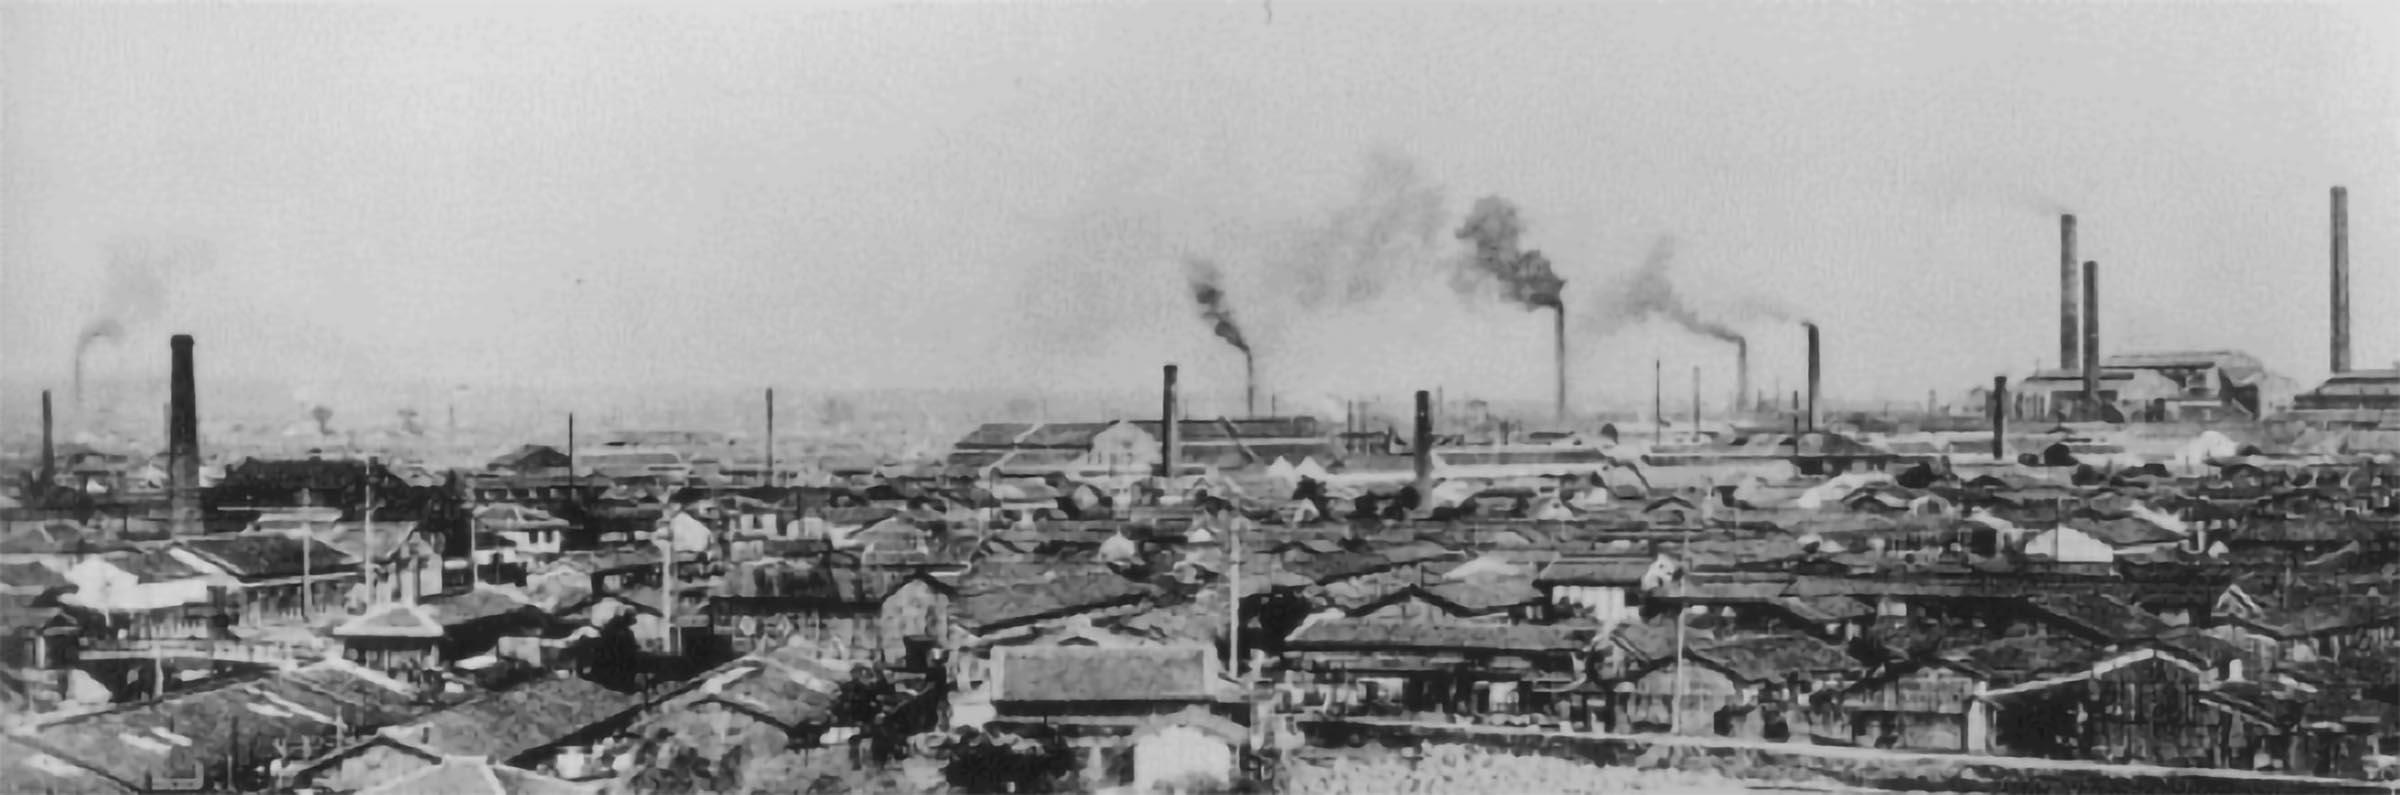 P01-06 – Lecture 6: Modern History II  “Light and Shadow in an Industrial City: The Back-Alley Tenements of Nipponbashi”